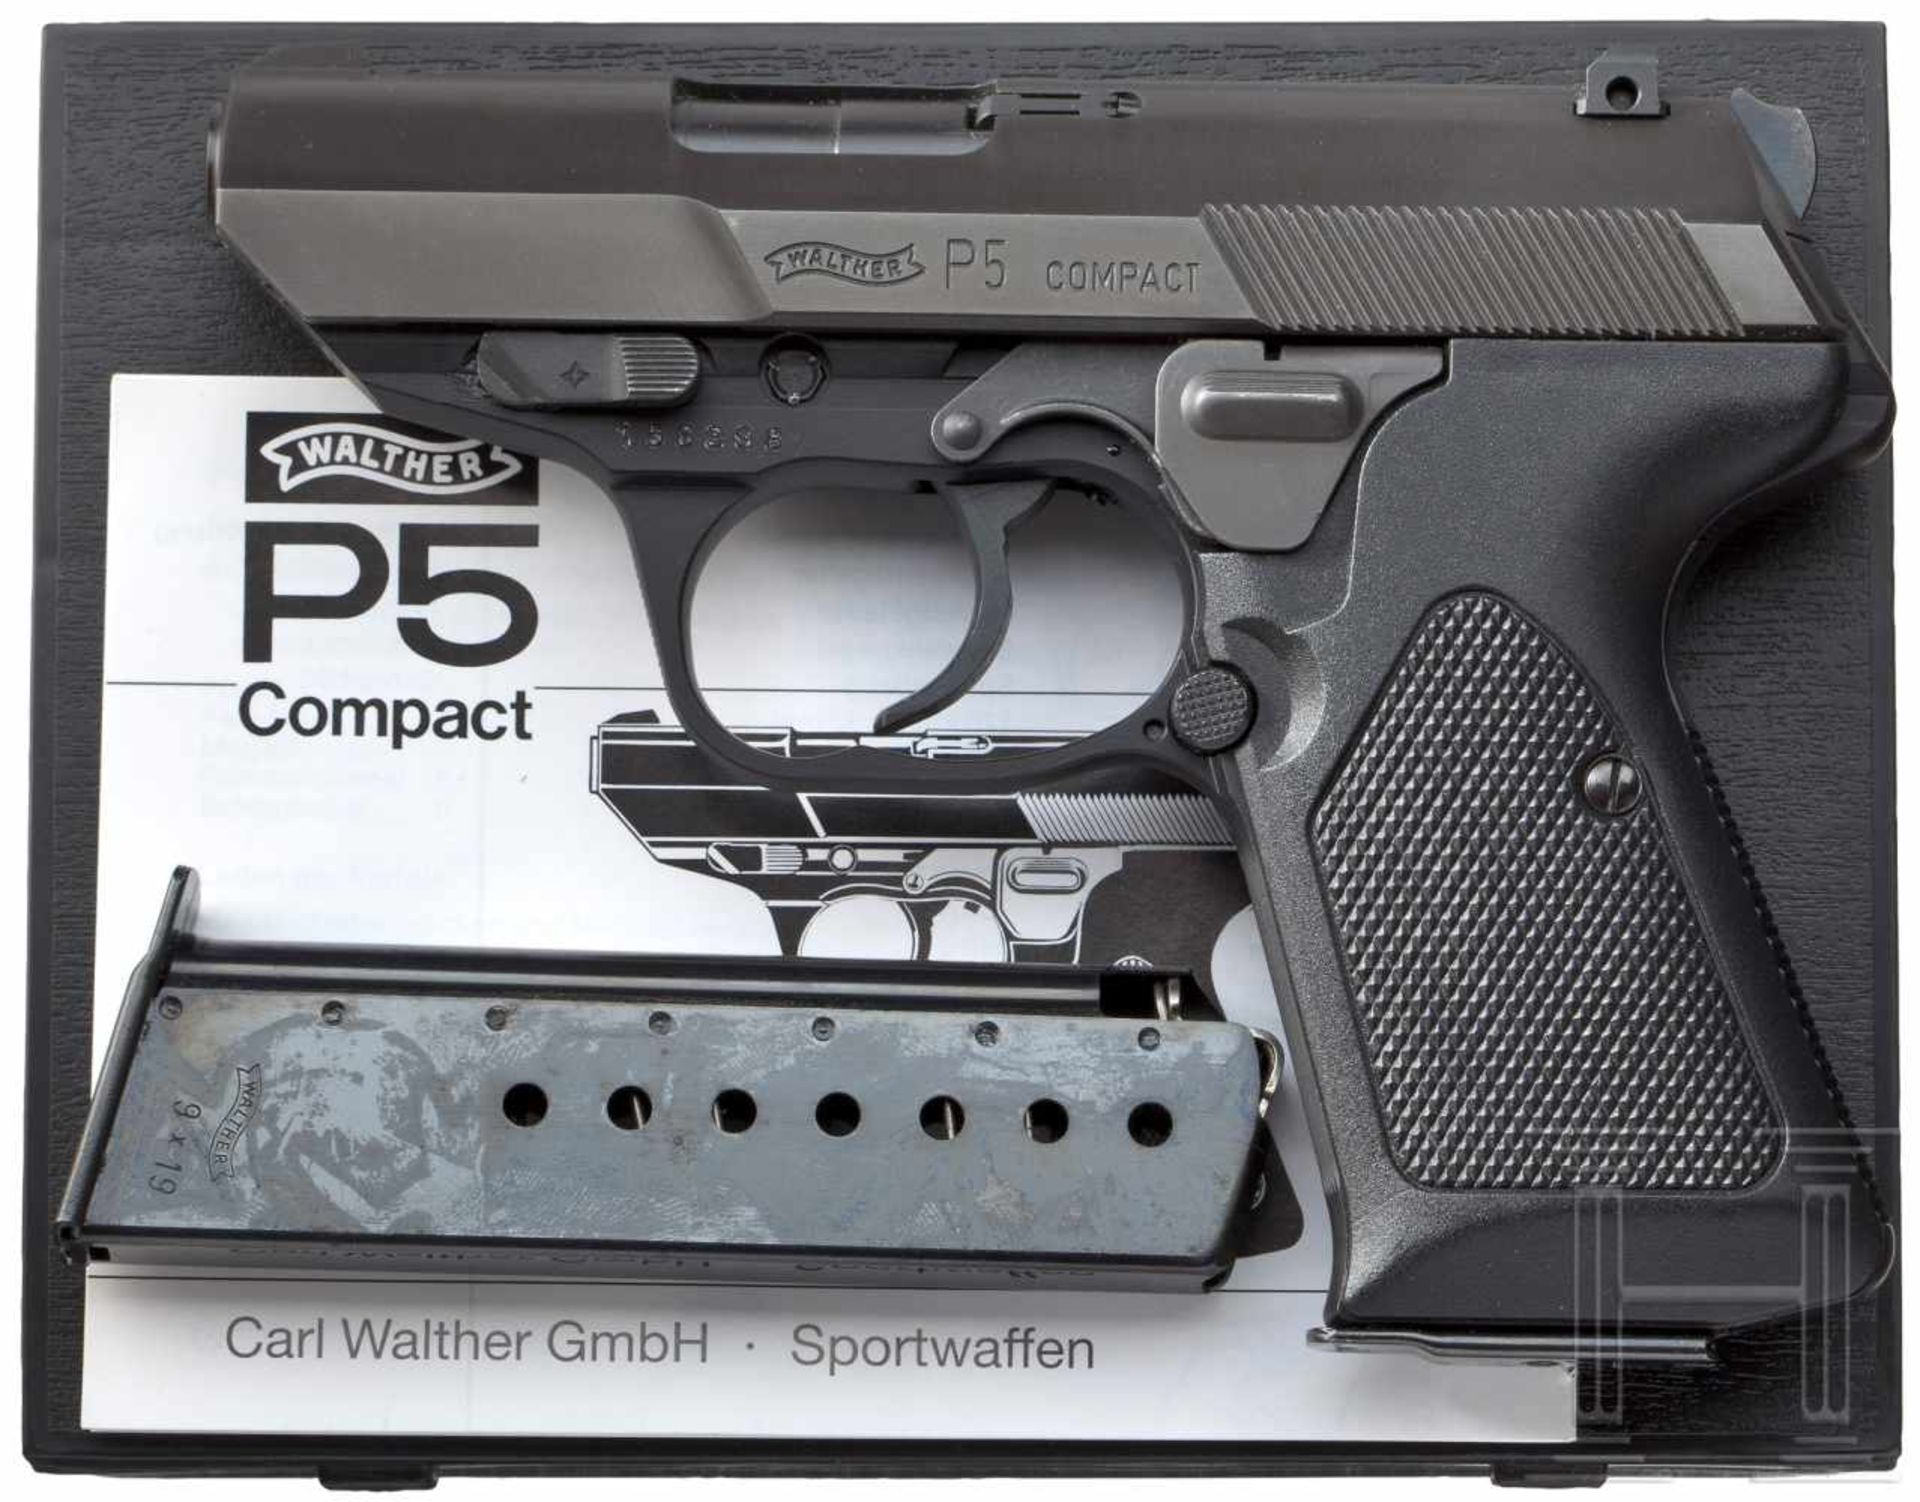 A Walther P 5 Compact, new in box